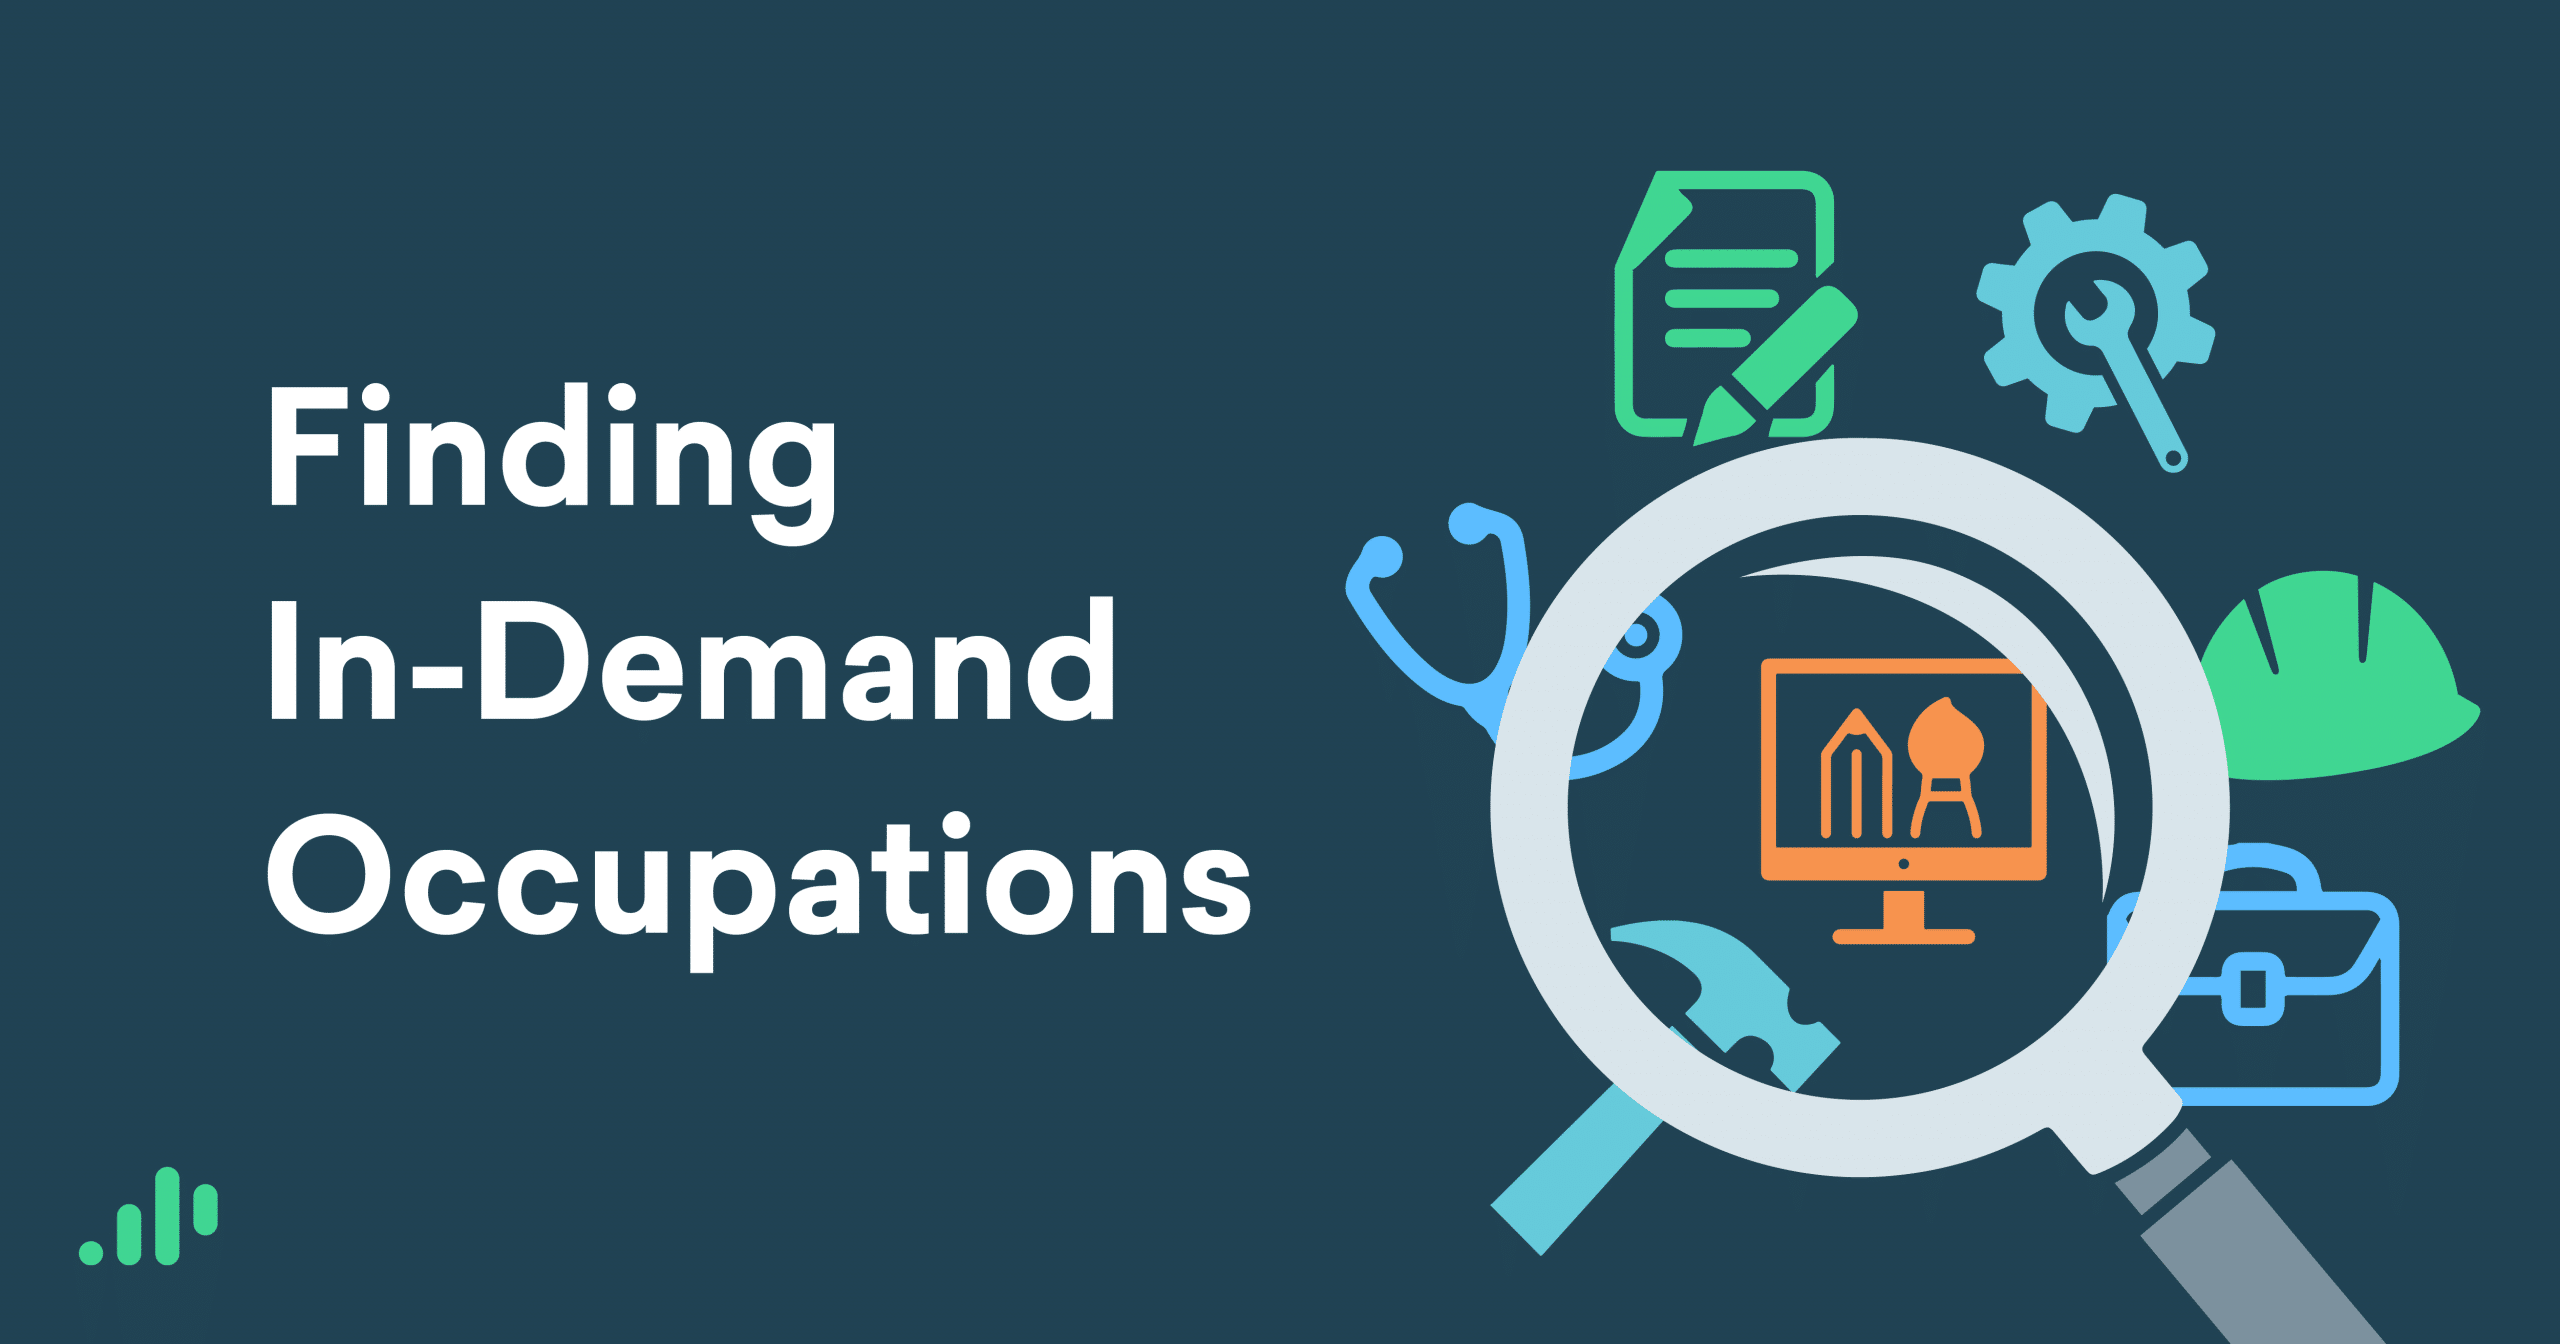 Video: How to Find In-Demand Occupations